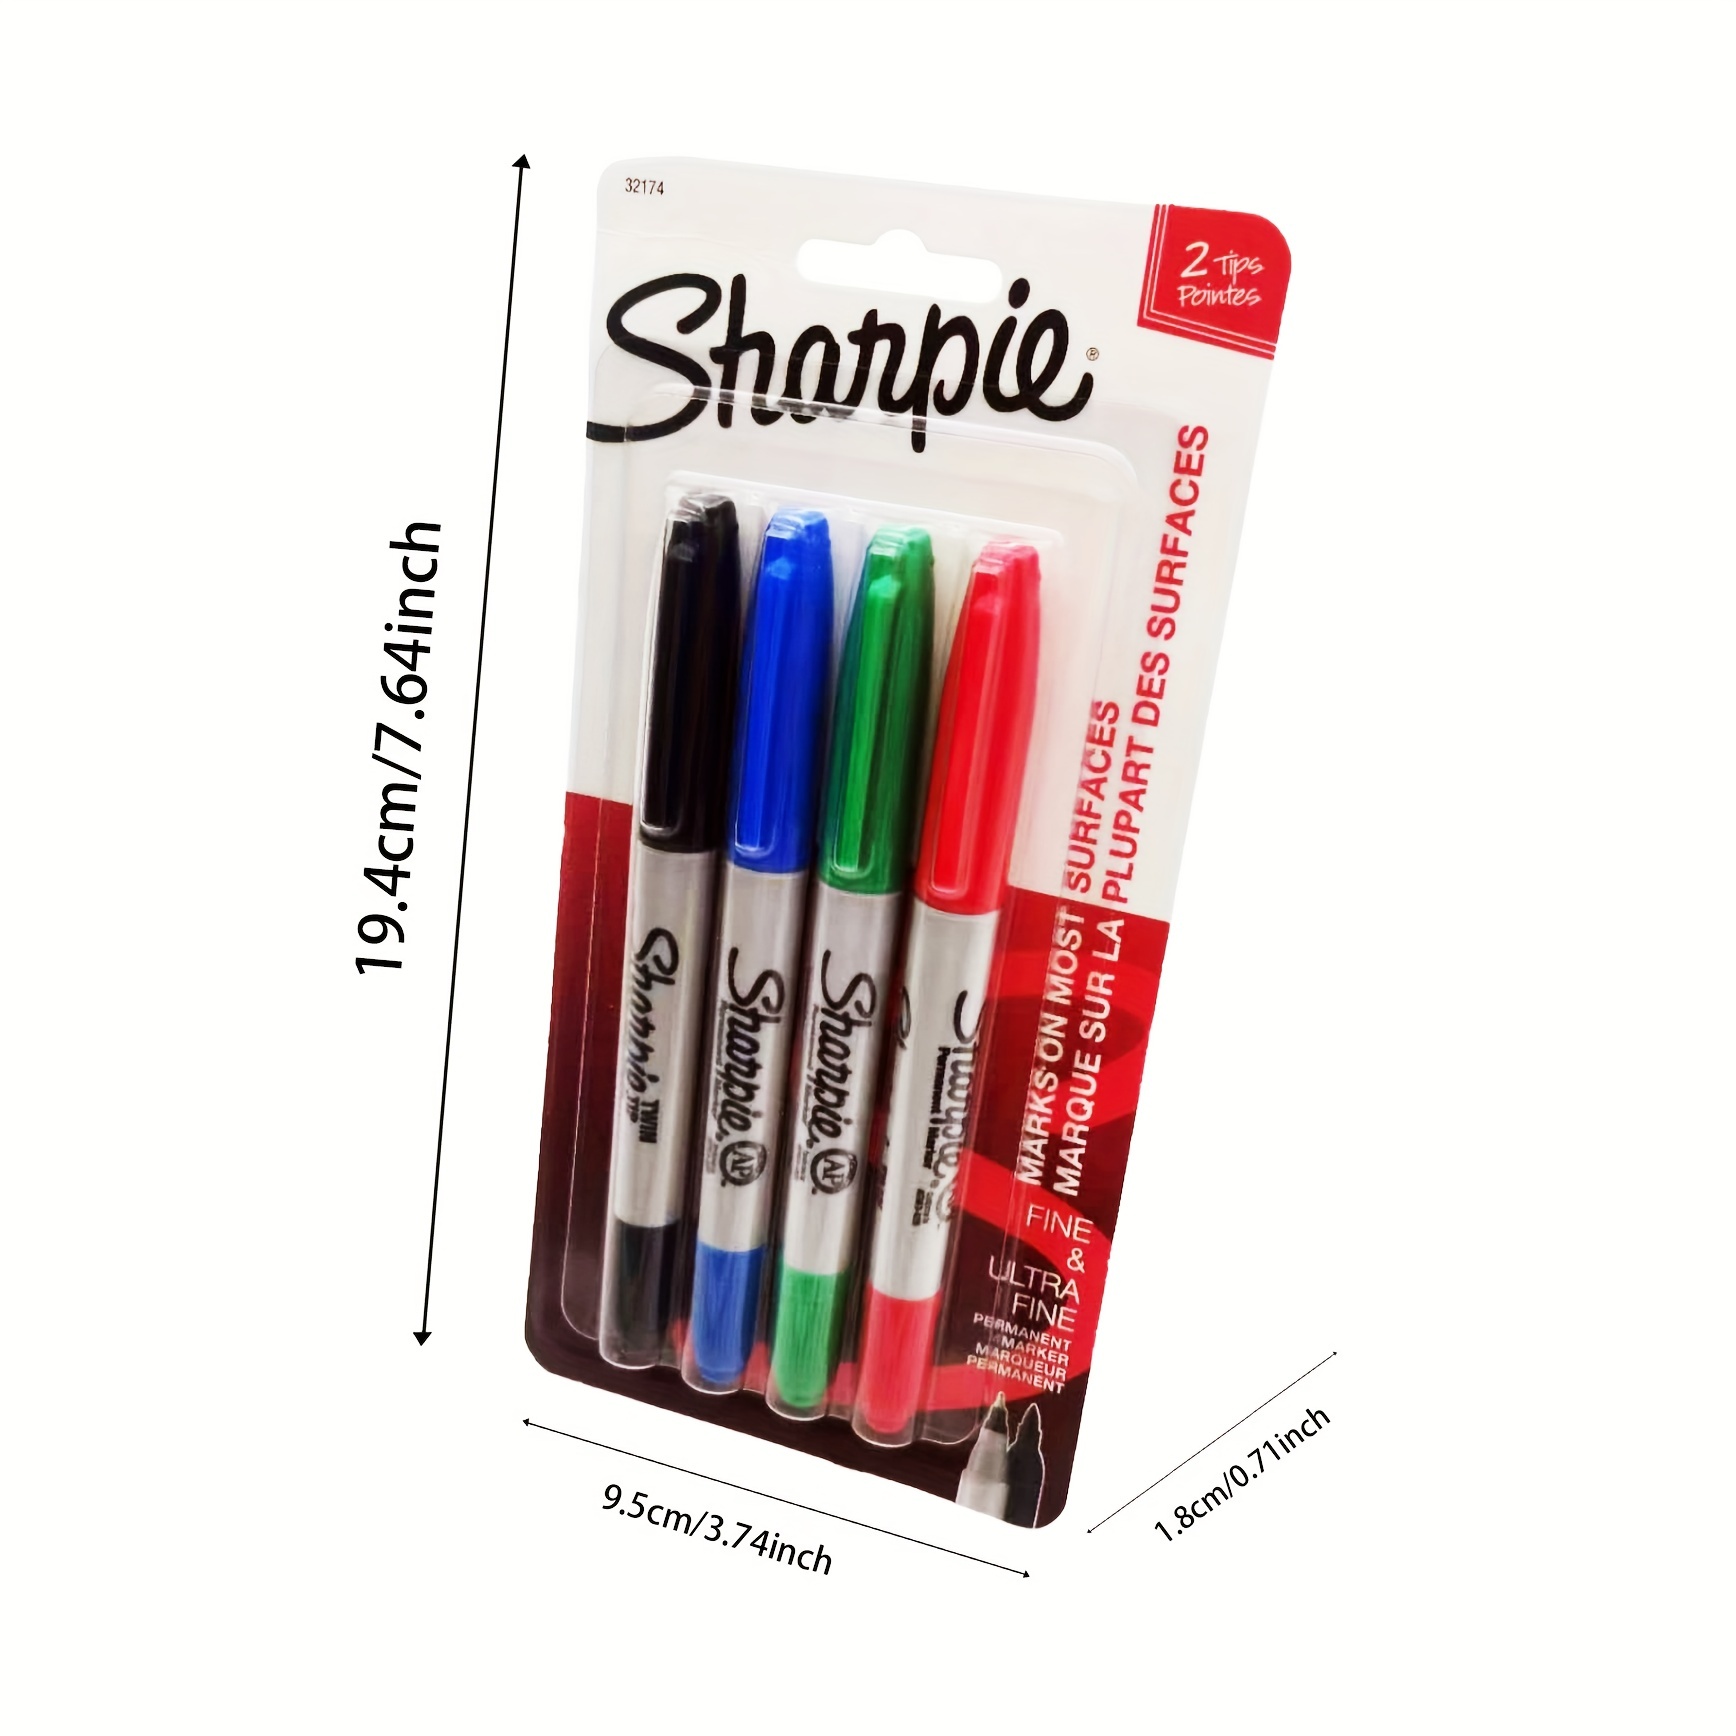 4pcs Metallic Marker Pen, Simple Easy To Use Permanent Marker For